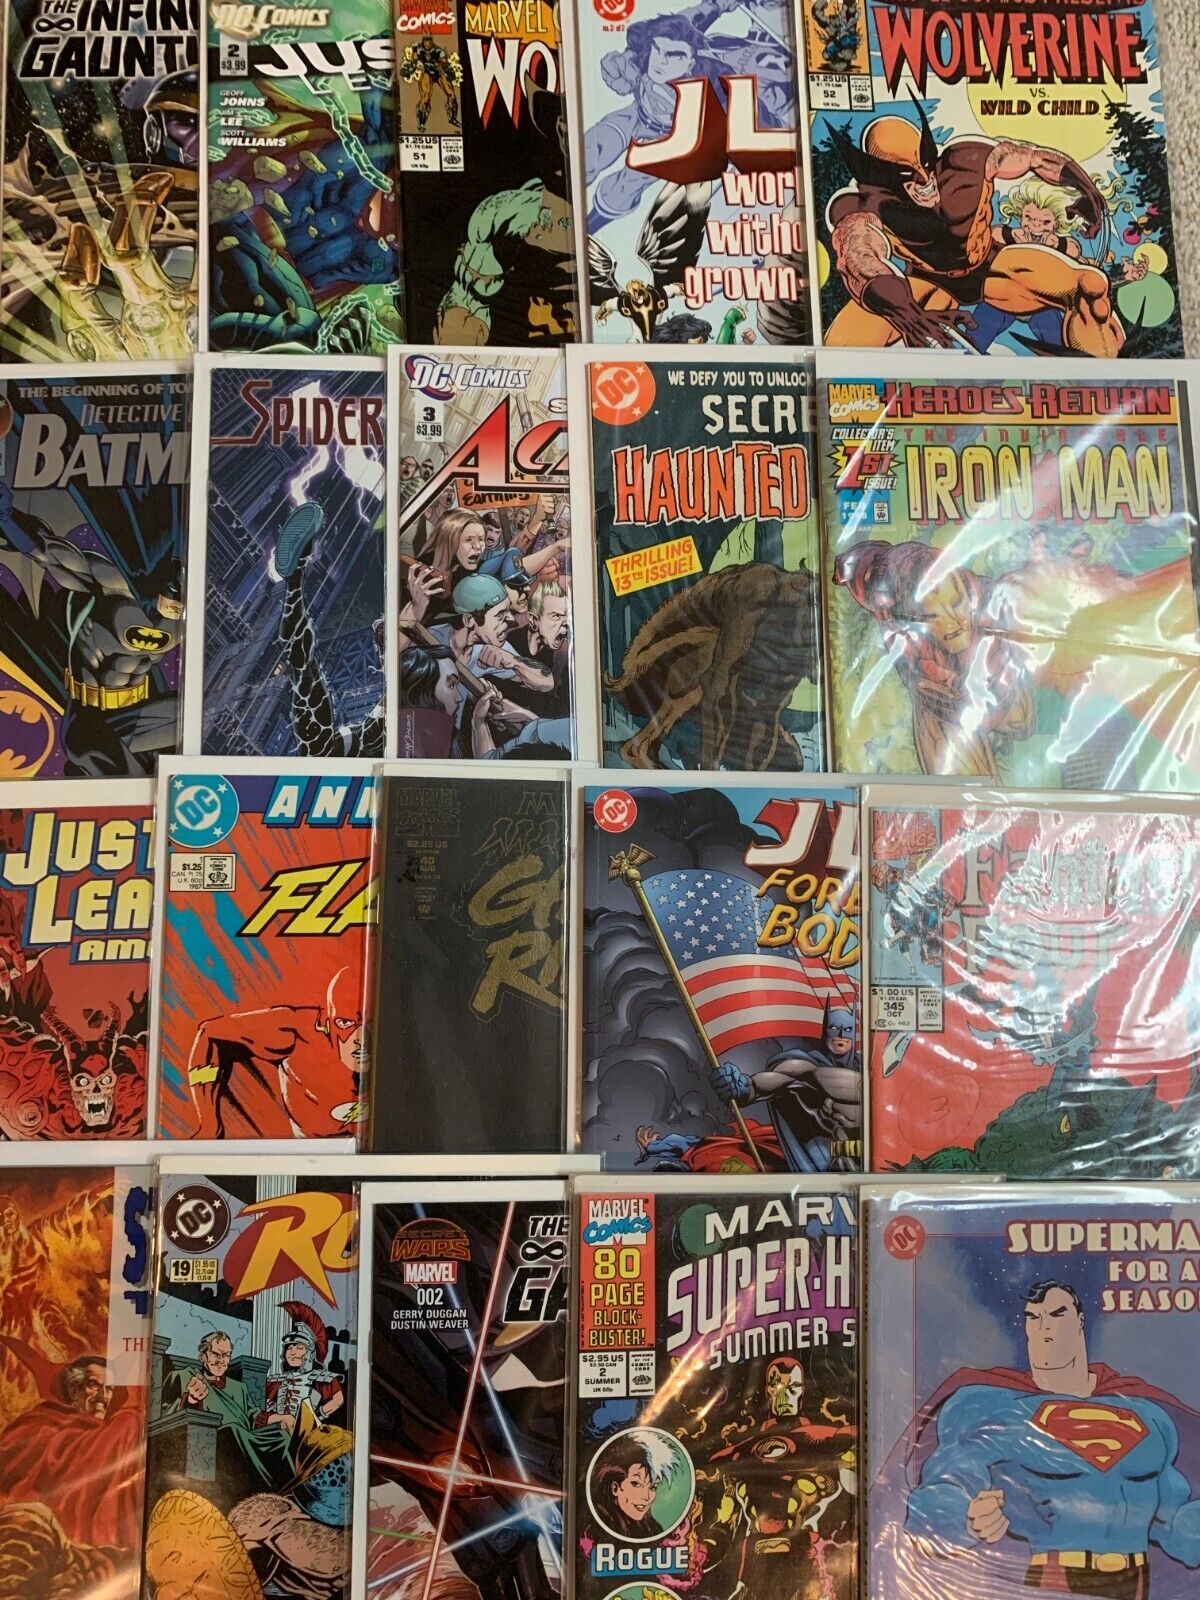 Marvel/DC Comic Book Lot of 25 Perfect Starter Collection FREE Economy Shipping